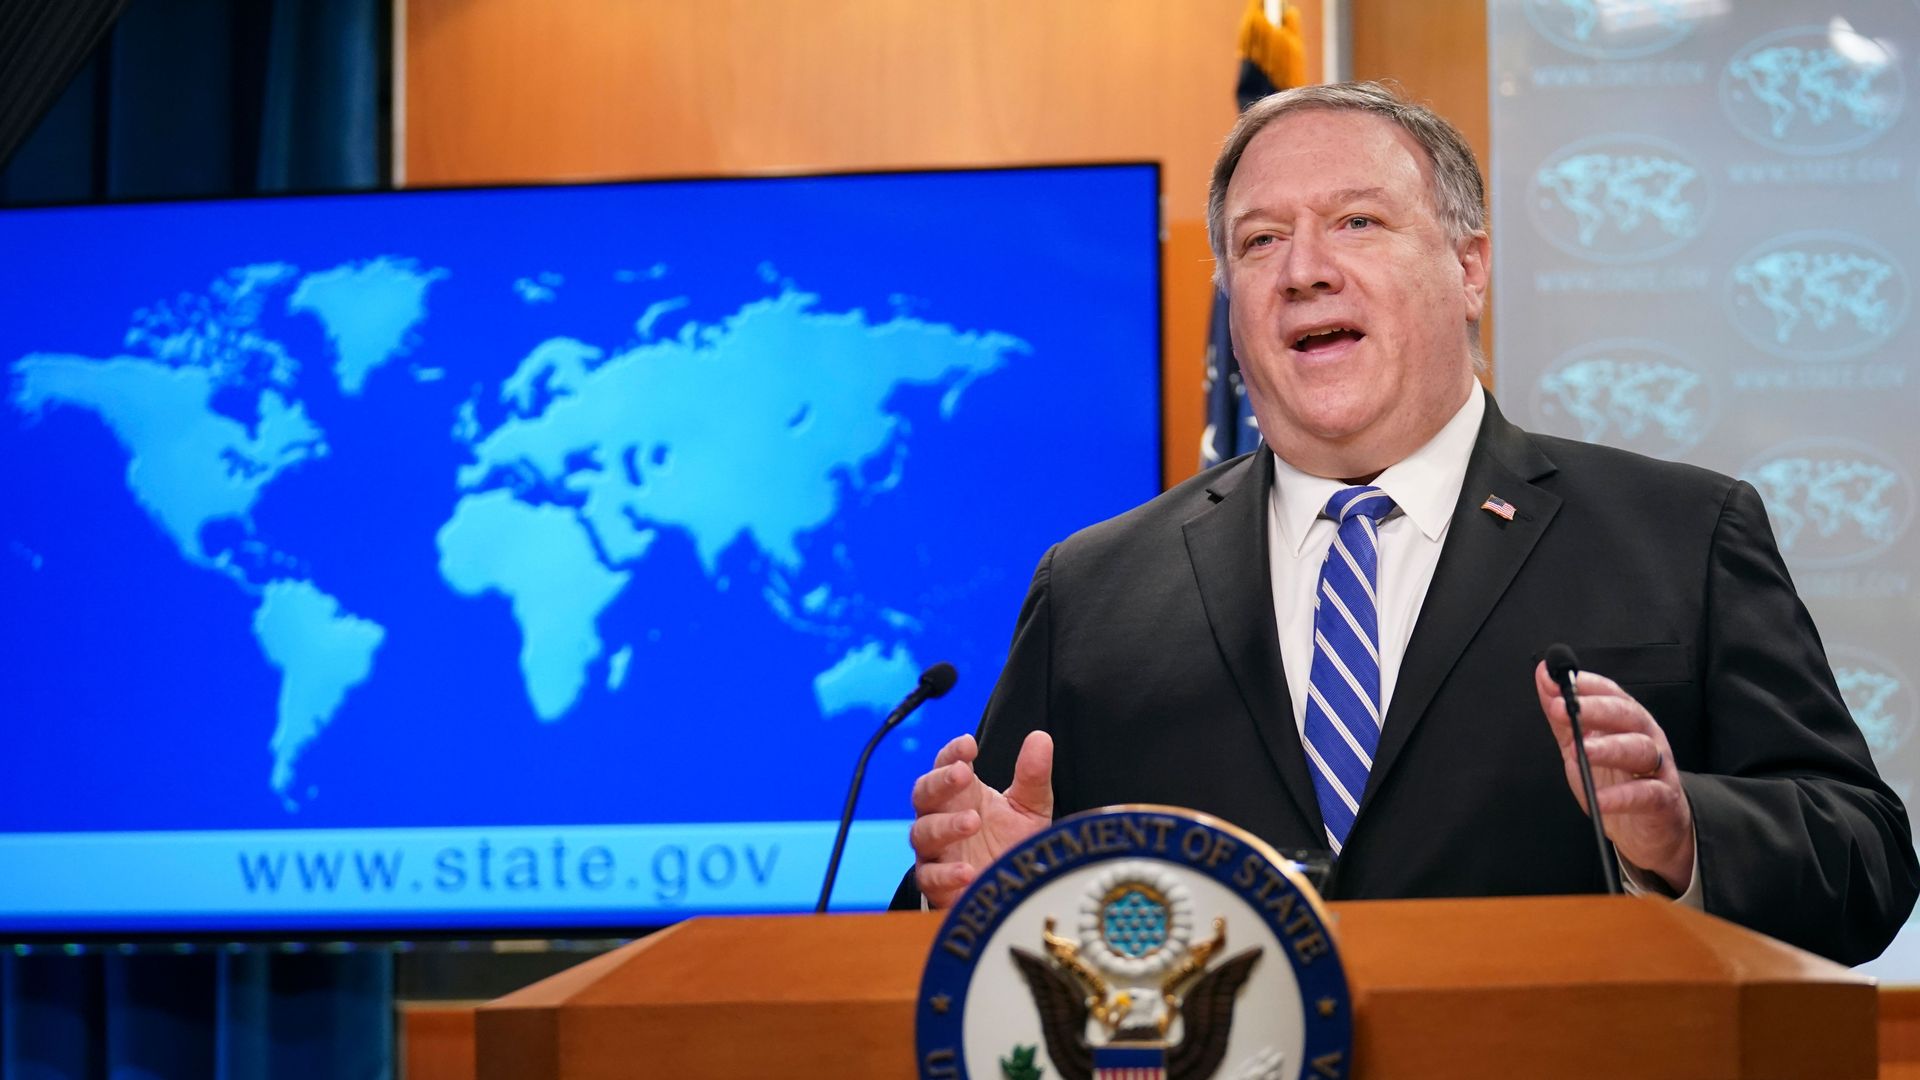 Secretary of State Mike Pompeo speaks at a podium while waving his hands.